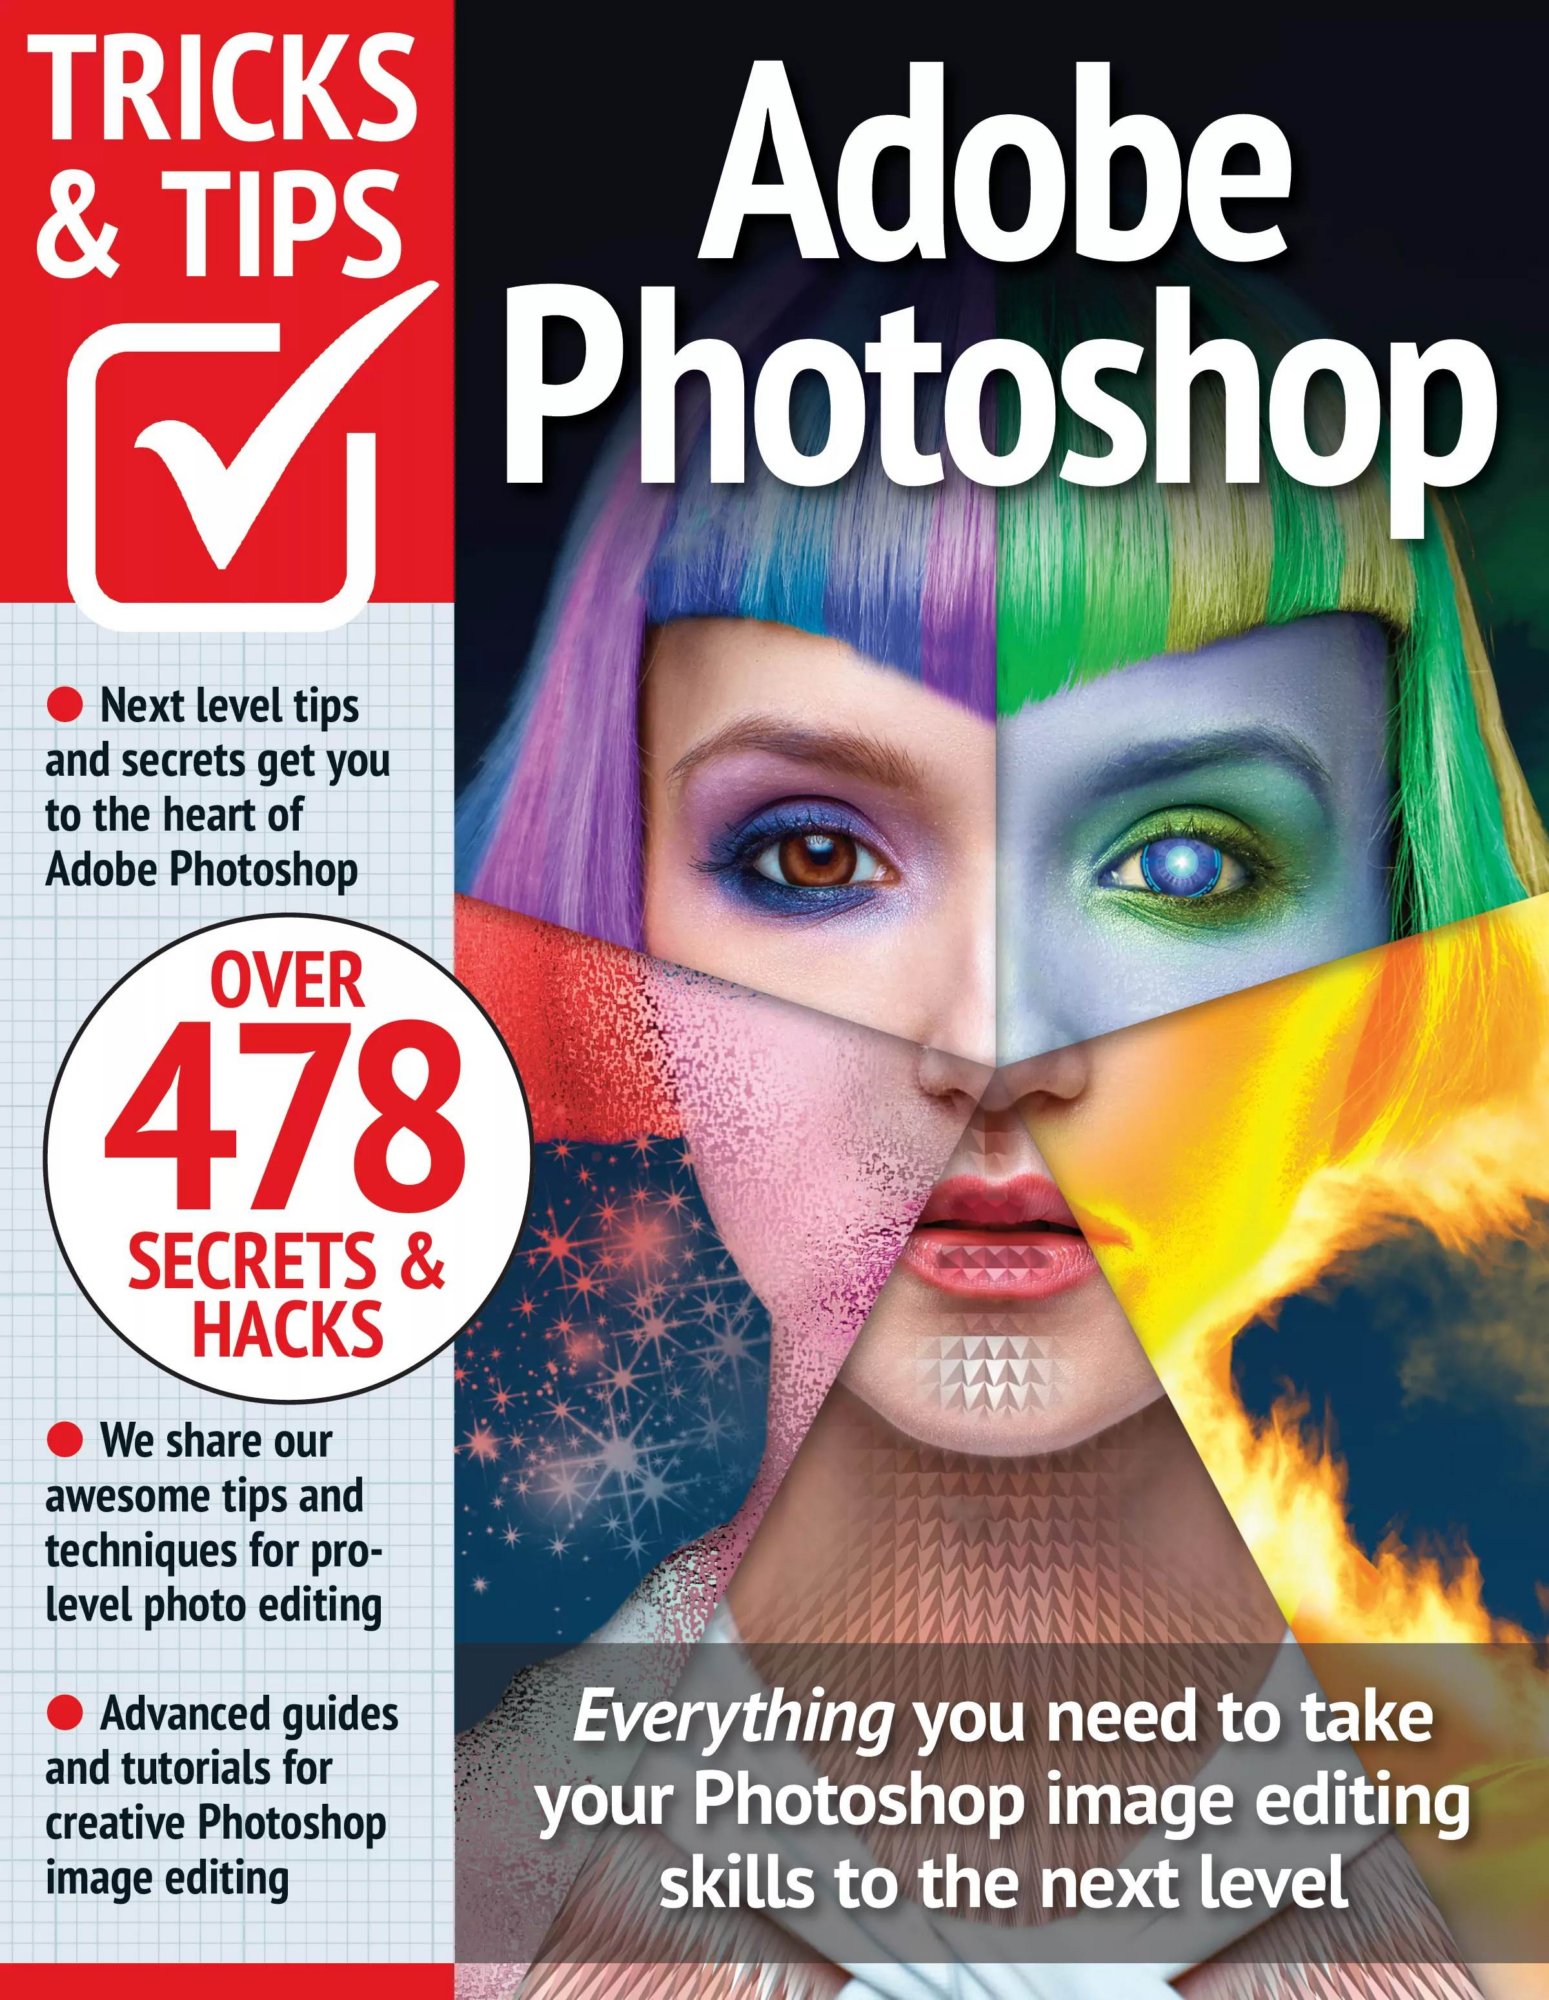 Adobe Photoshop Tricks and Tips - 14th Edition, 2023